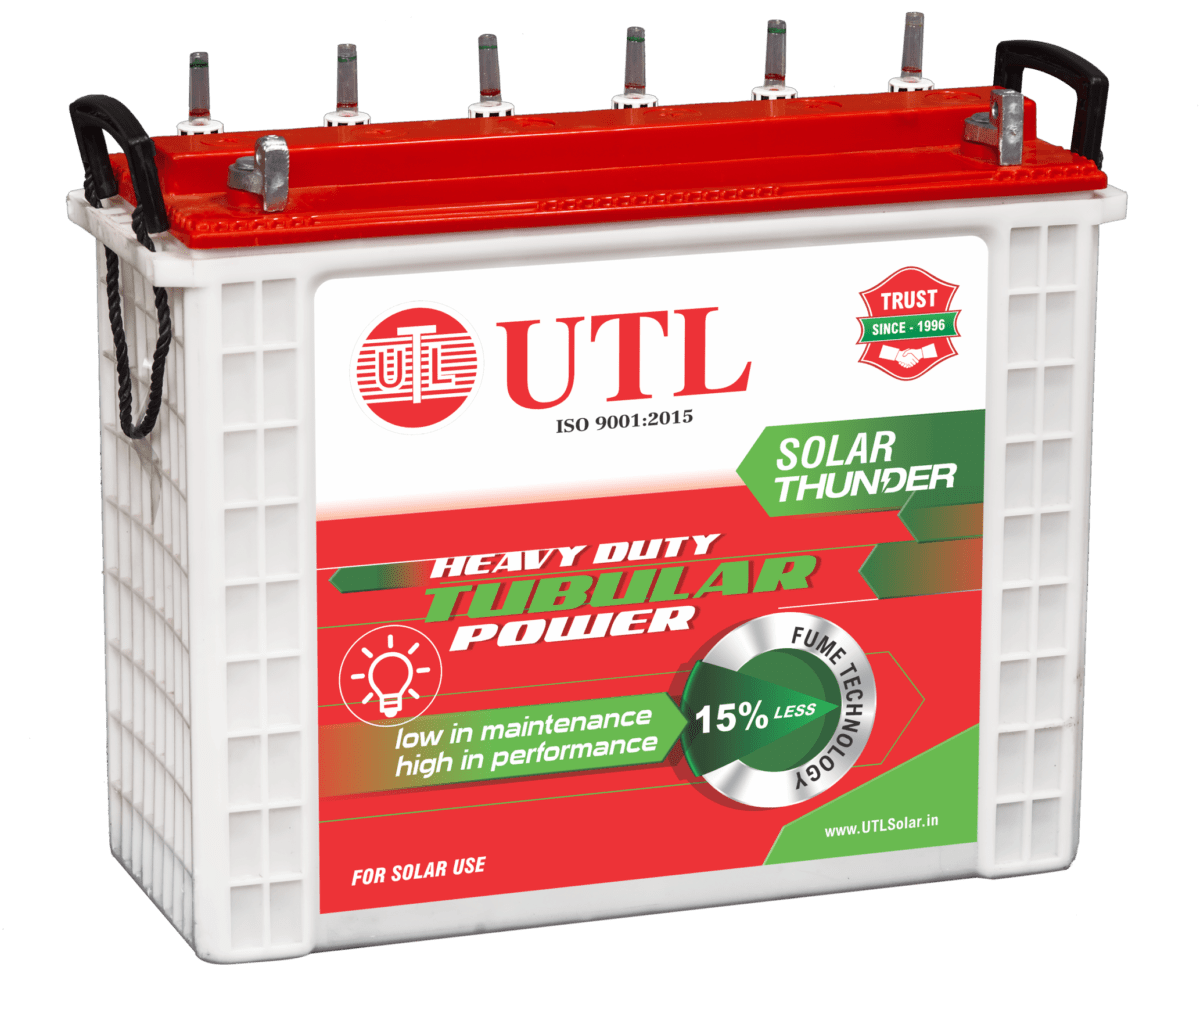 Buy UTL Solar Battery at Best Price in India with 36 months warranty